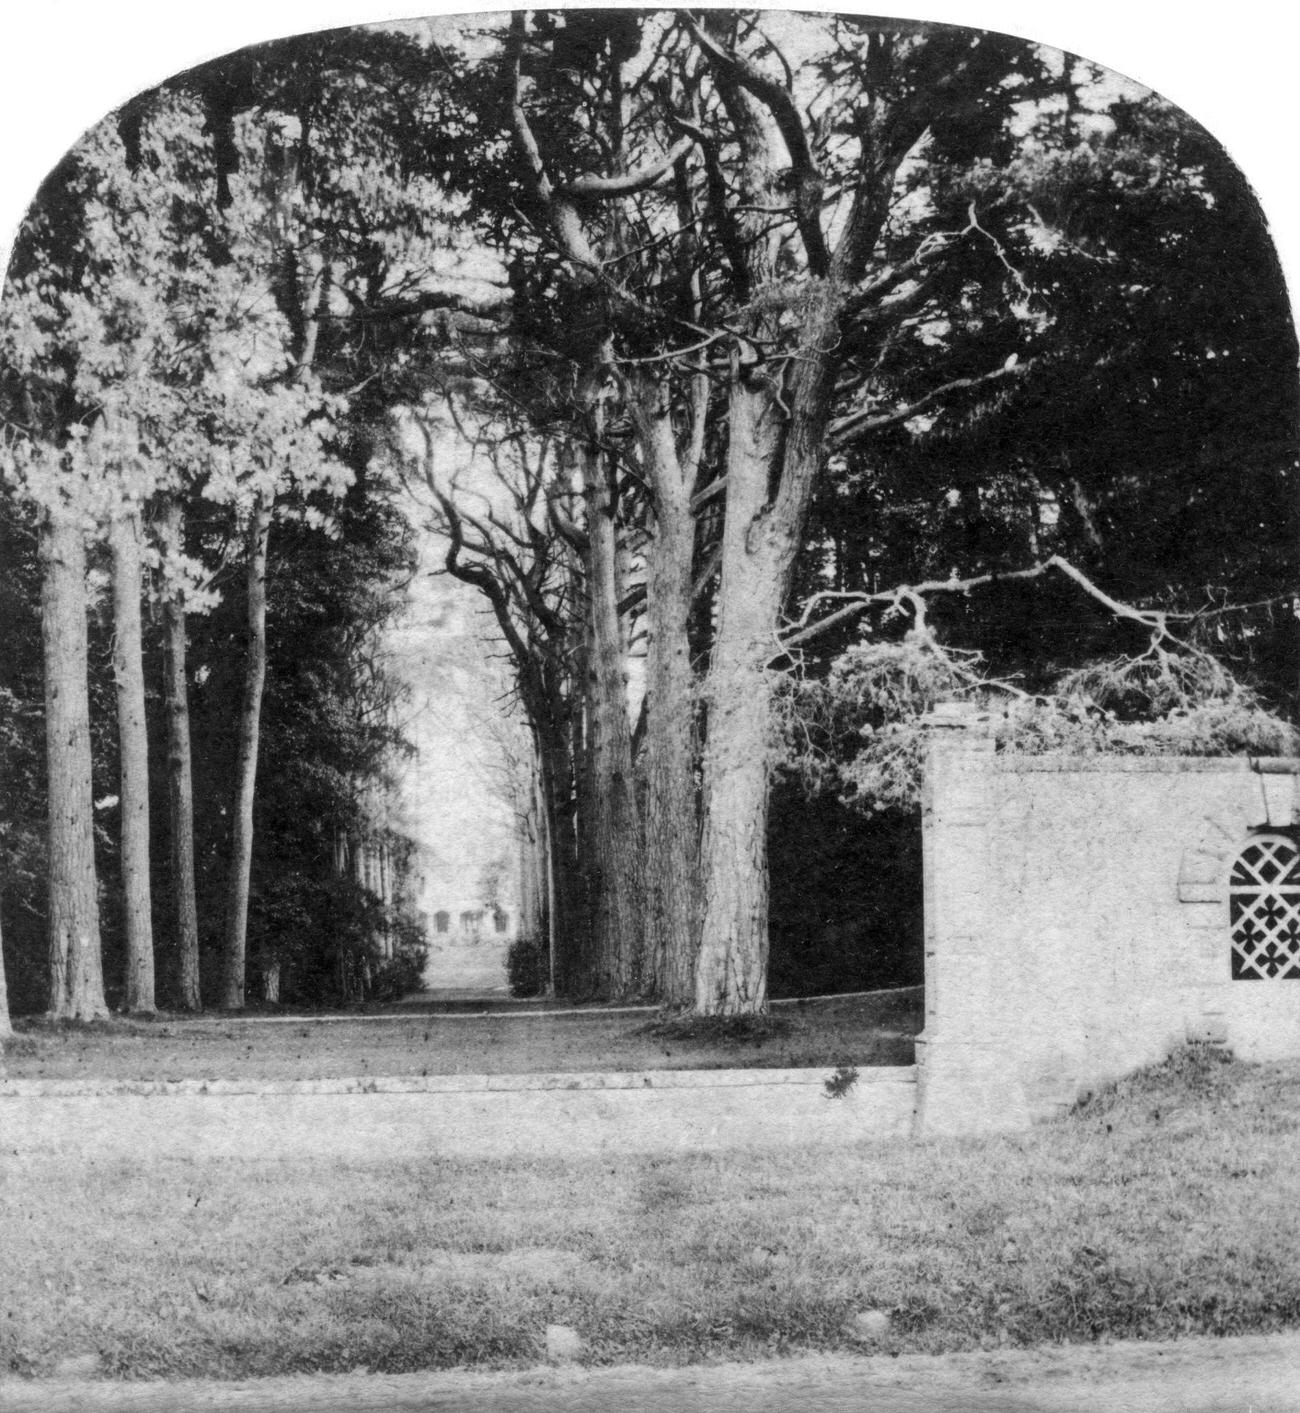 The Avenue at Guy's Cliff in Warwick, 1900s